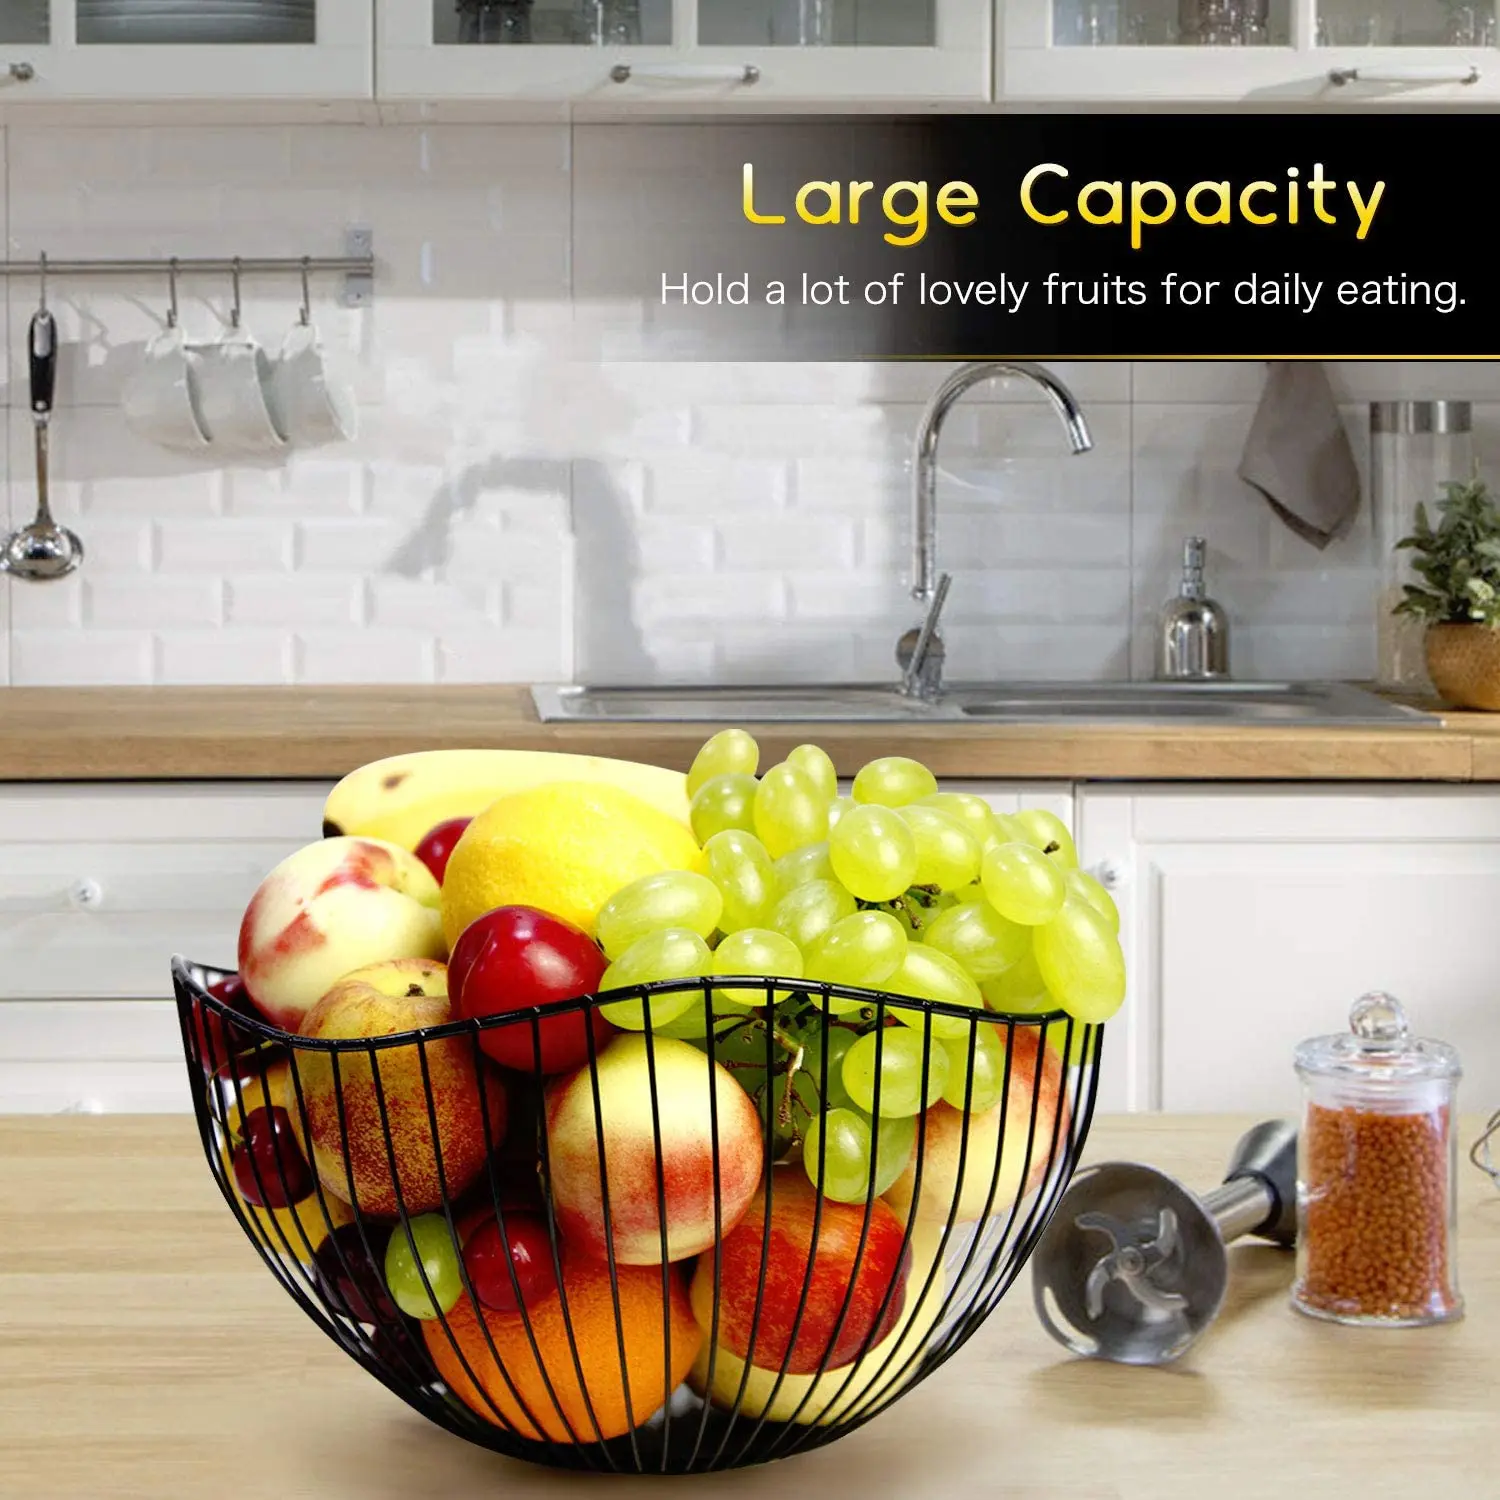 Egg K Cup 10 Inch Restaurant Large Gold Decorative Table Centerpiece Holder for Bread Candy Metal Mesh Creative Countertop Fruit Basket Bowl Stand for Modern Kitchen 